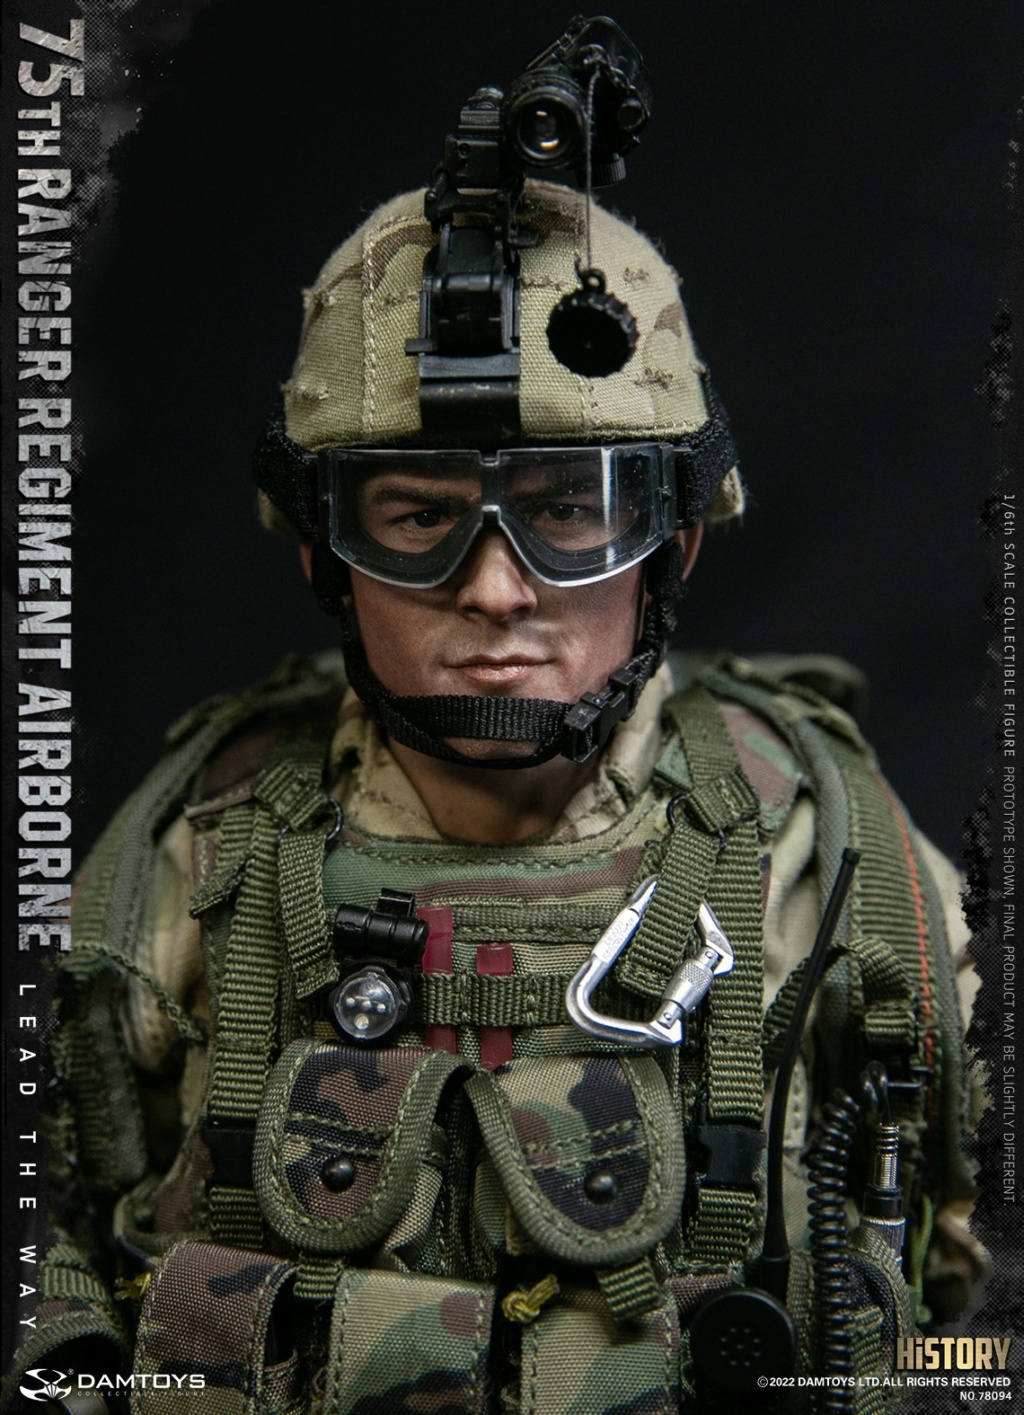 NEW PRODUCT: DAMTOYS: 78094 1/6 Scale 75th RANGER REGIMENT AIRBORNE